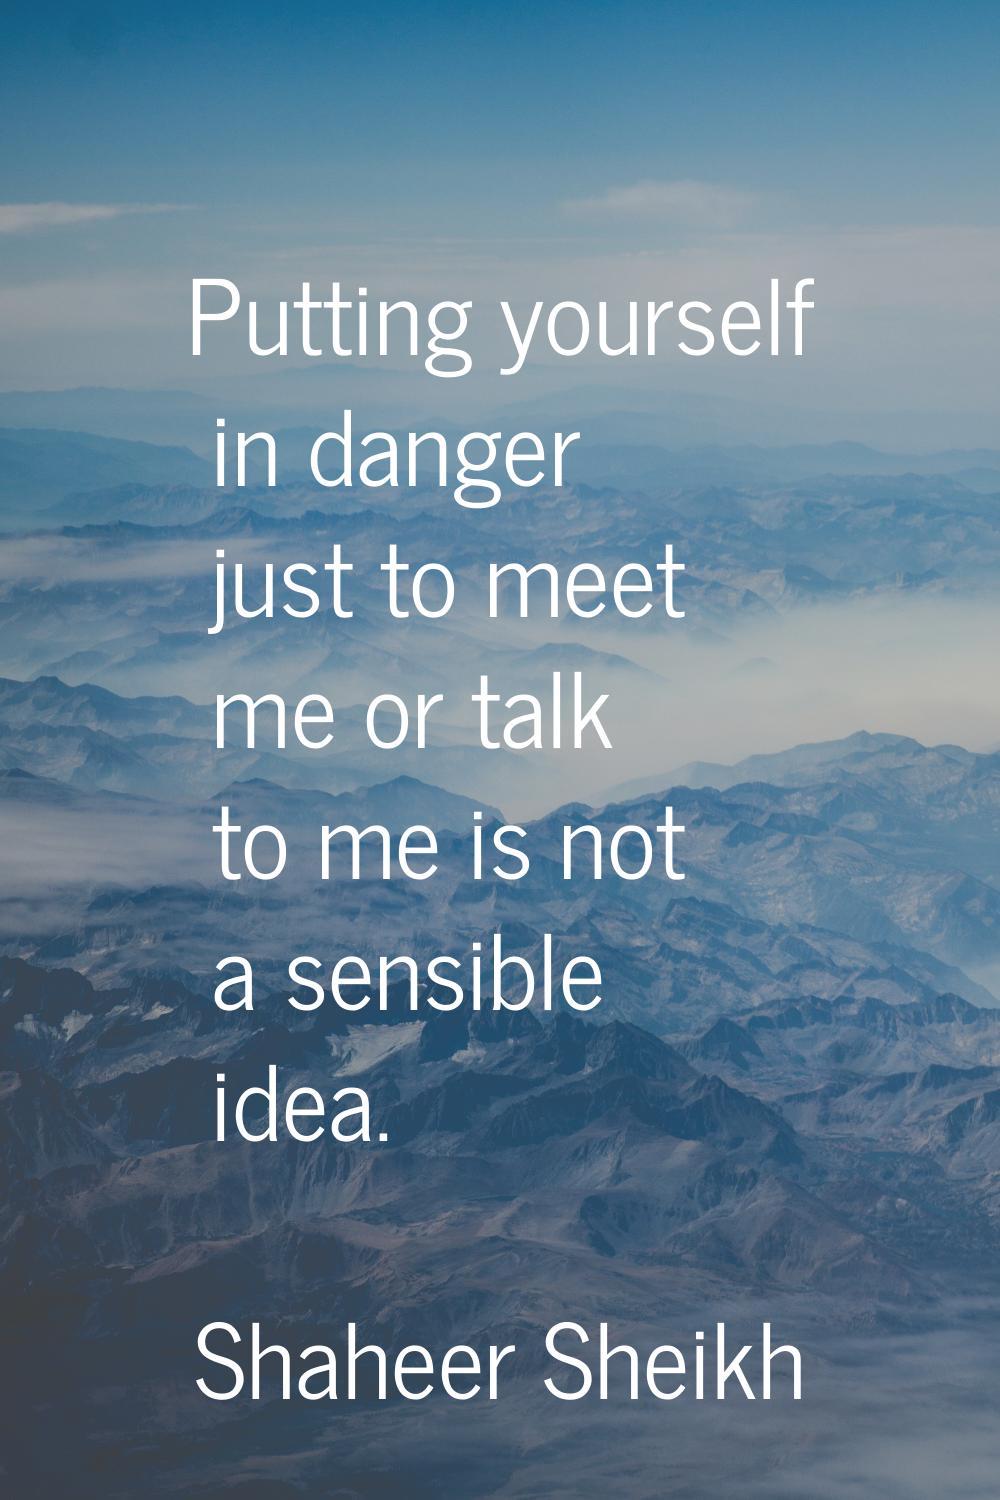 Putting yourself in danger just to meet me or talk to me is not a sensible idea.